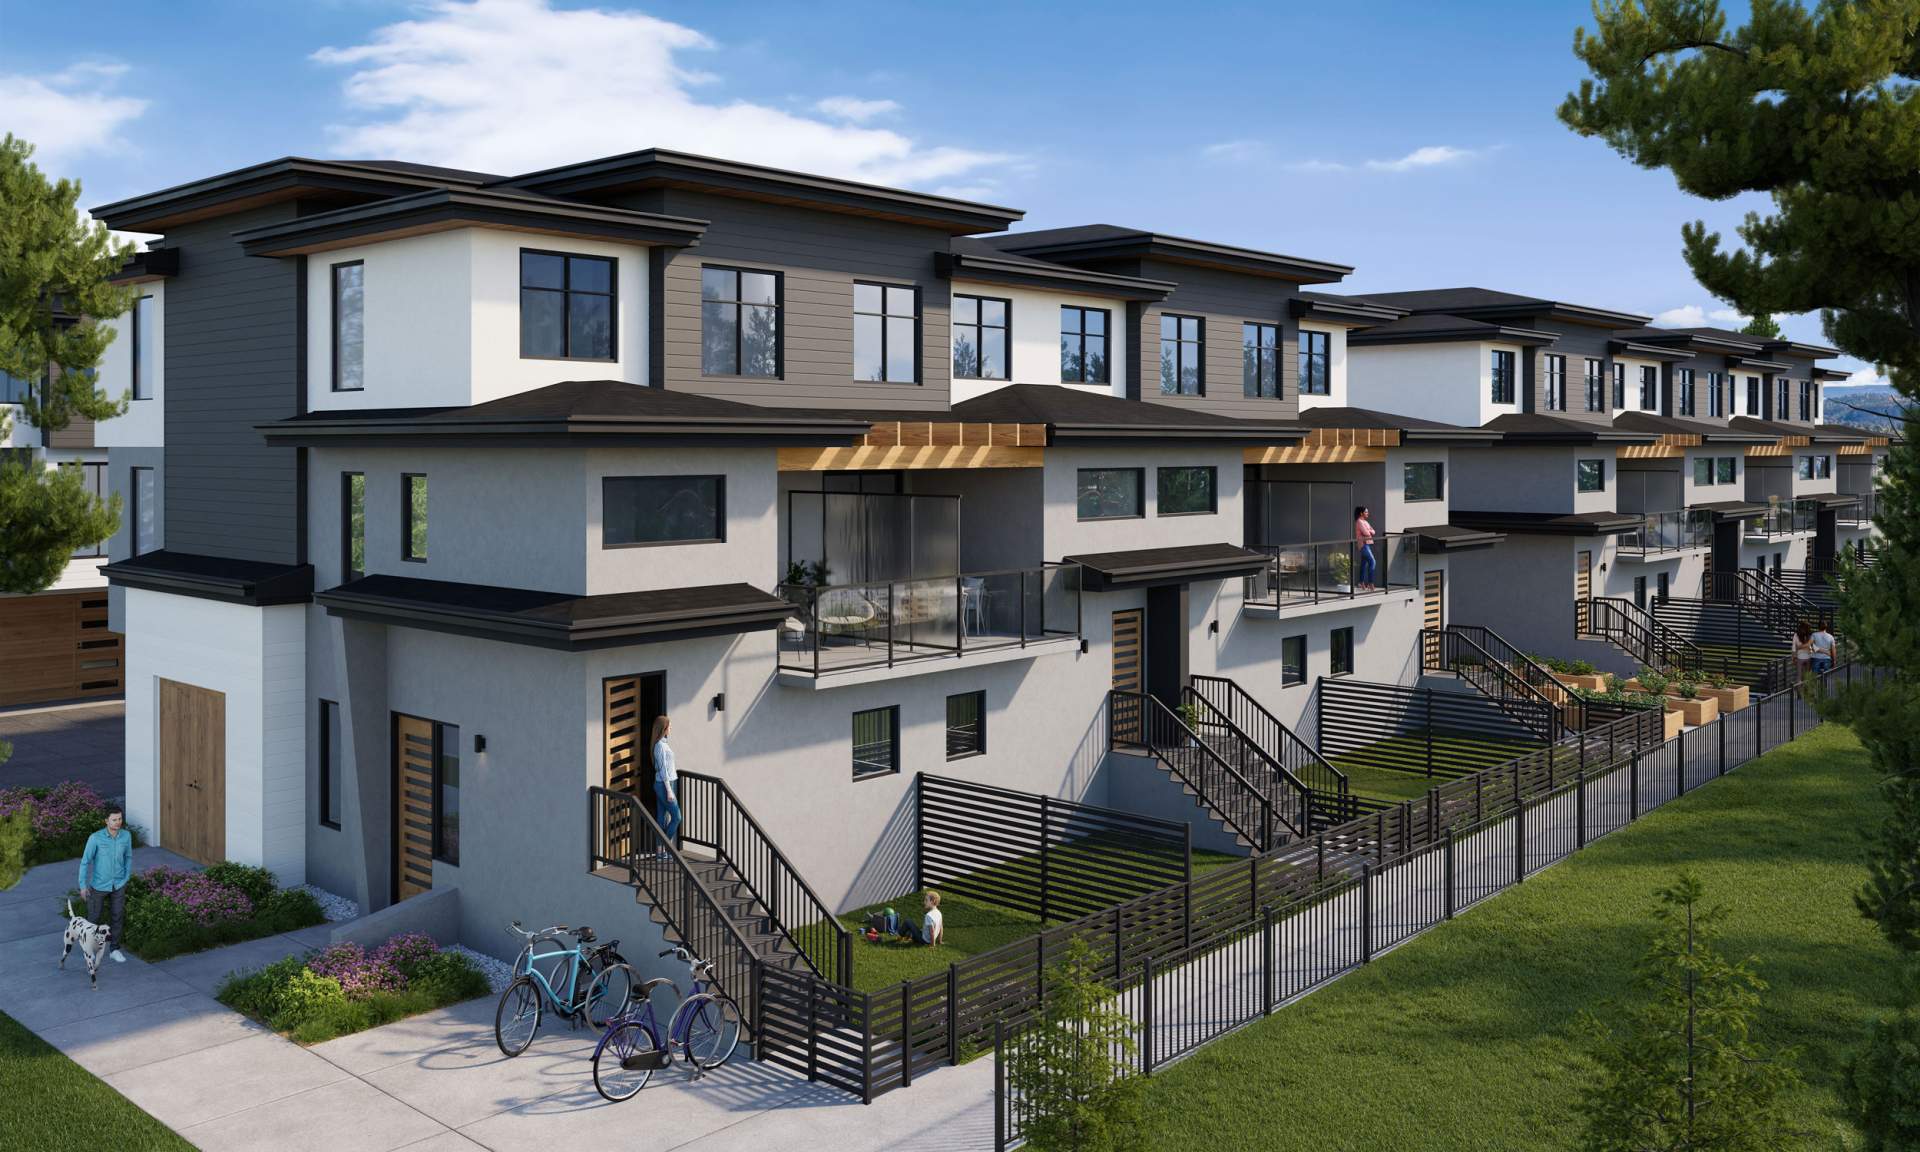 A boutique collection of 20 family-size townhomes in Rutland.